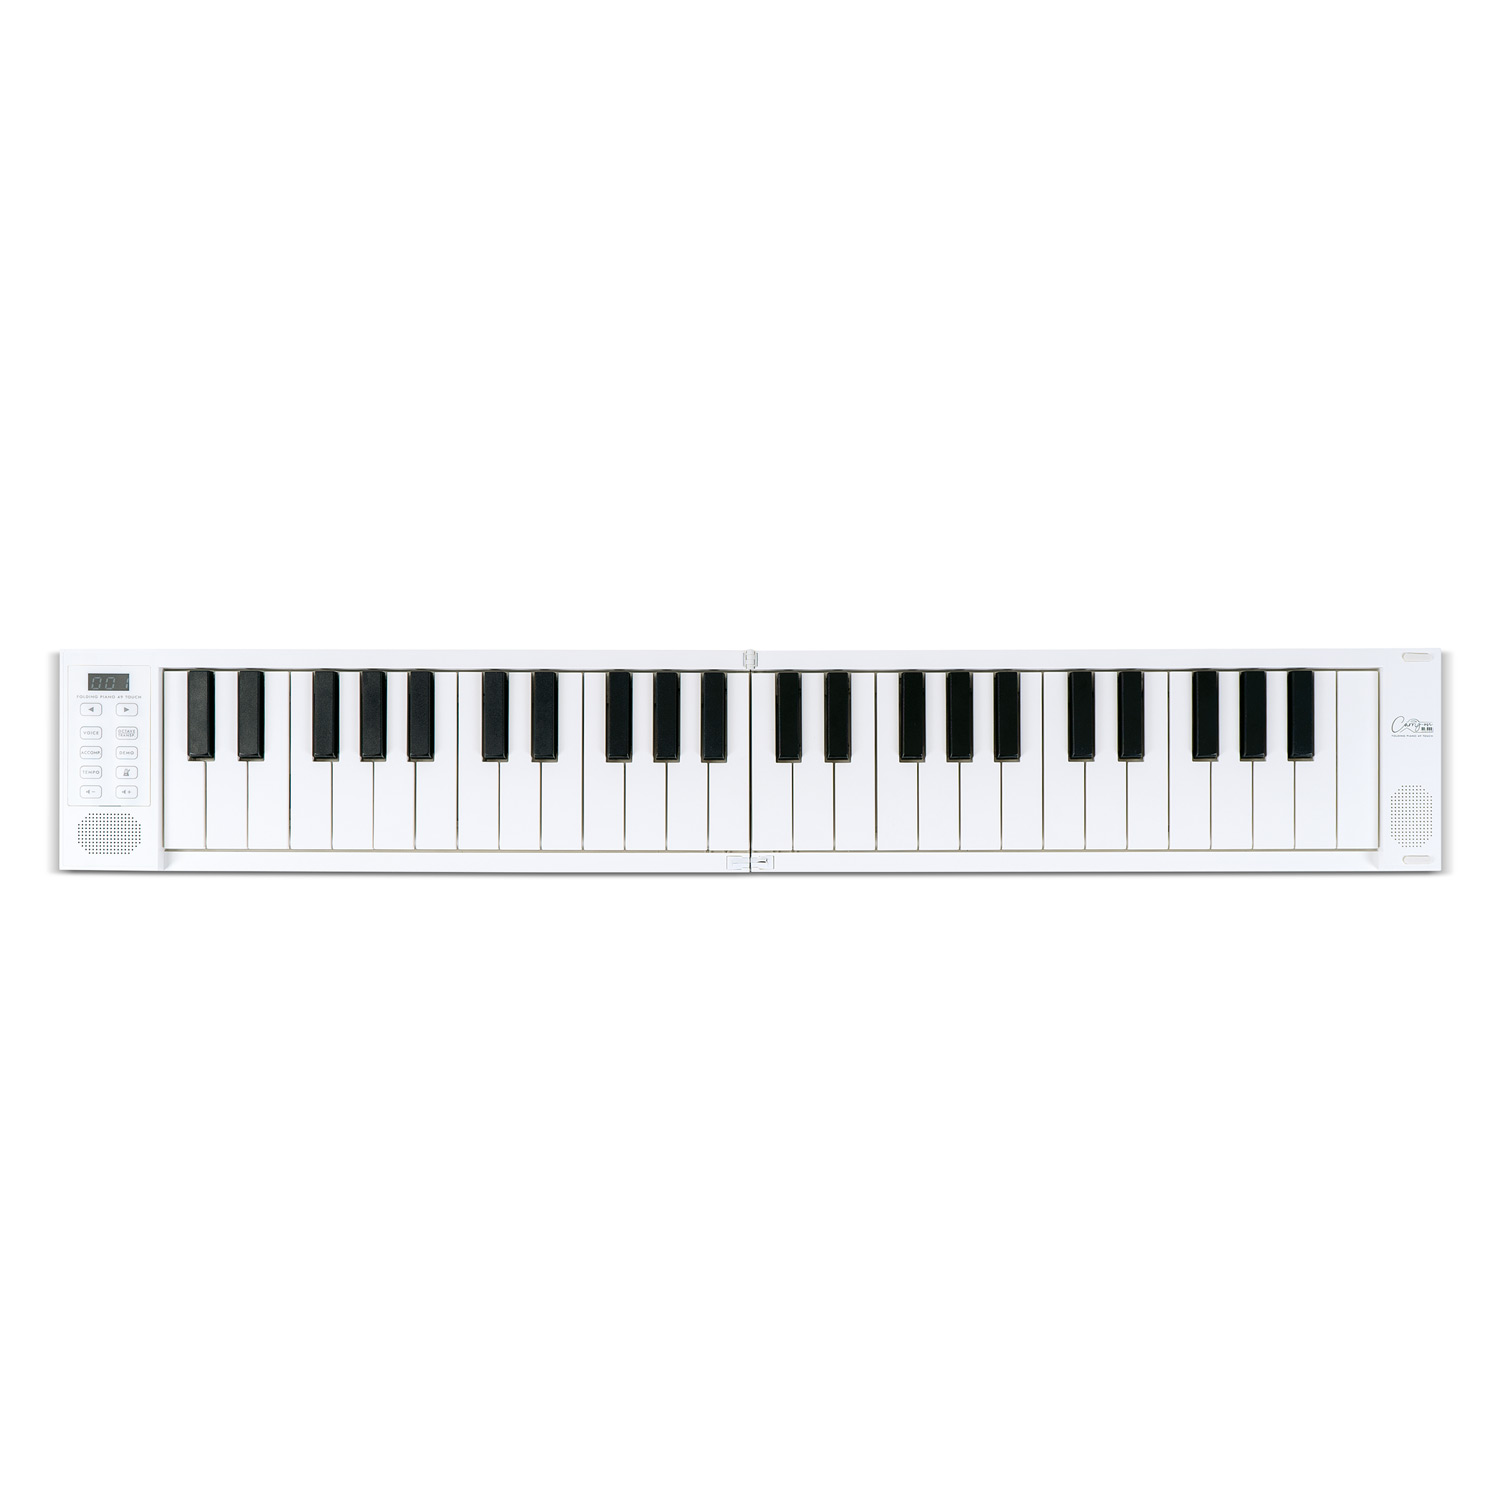 49 Keys Folding Piano With Touch Sensivity & Pads, Midi Over Bluetooth – White Color (Free Software Included)